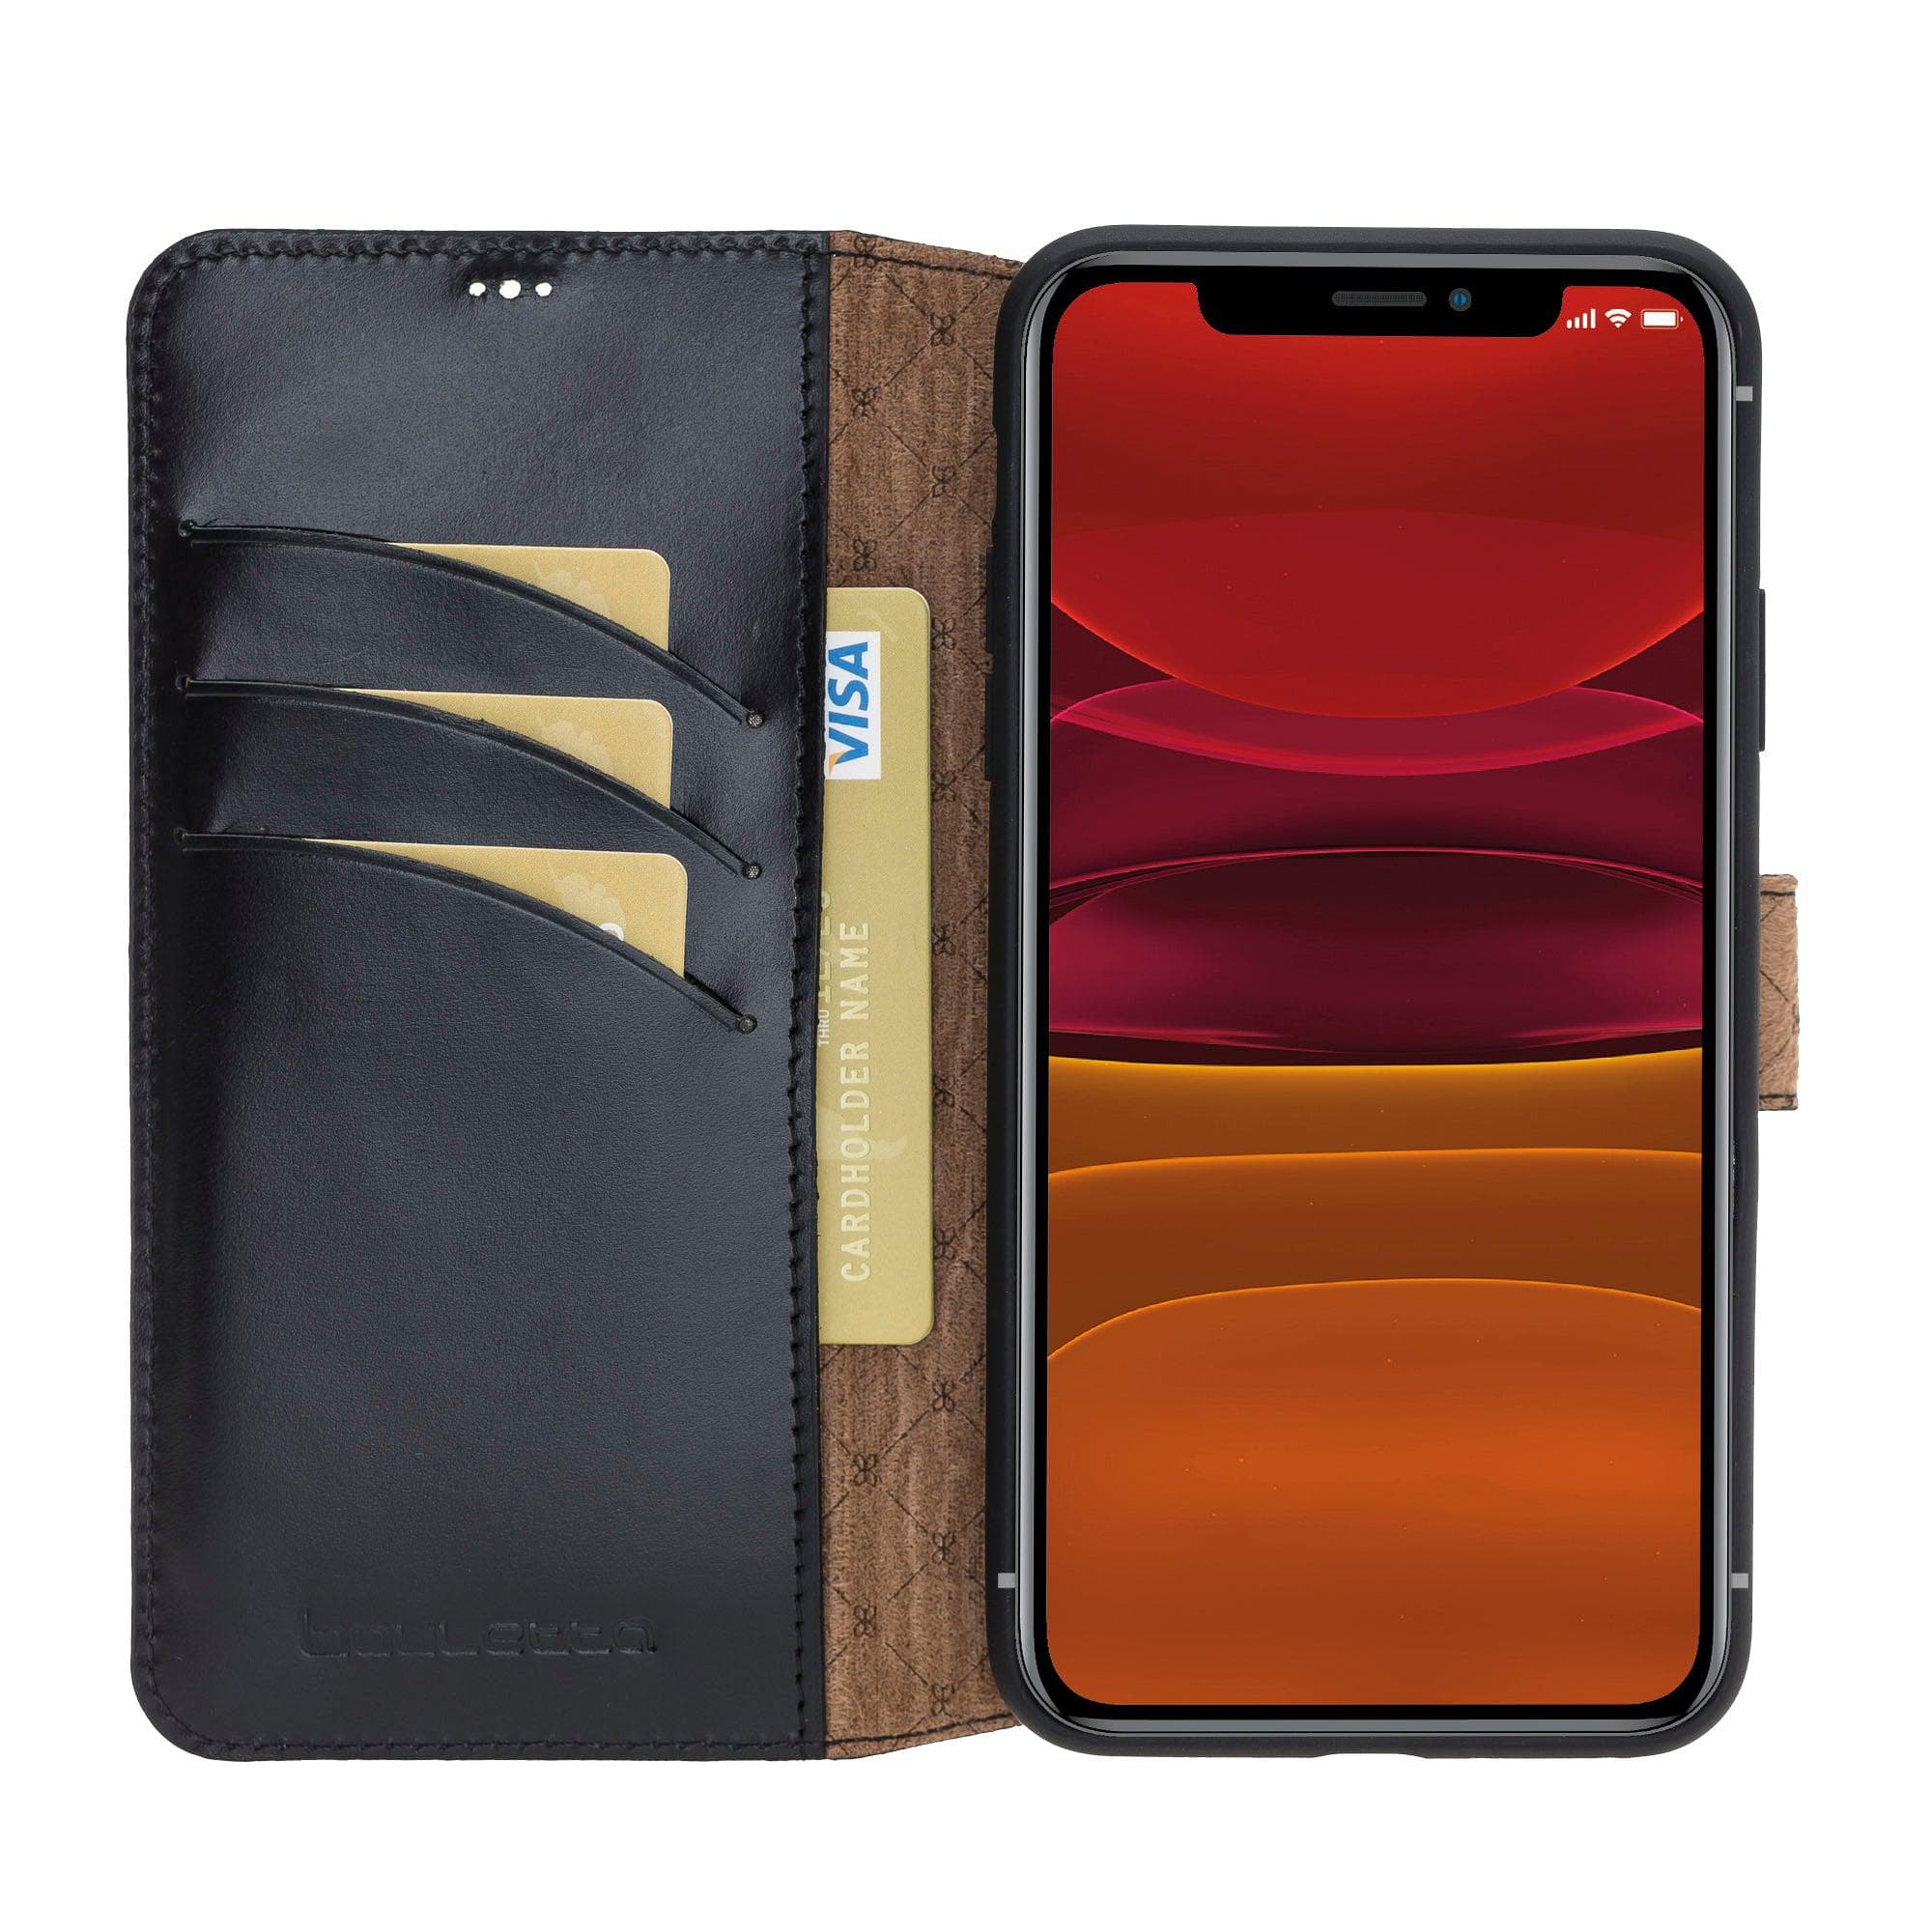 Wallet Folio with ID Slot Leather Wallet Case For Apple iPhone 11 Series İPhone 11 Promax / Black Bouletta LTD